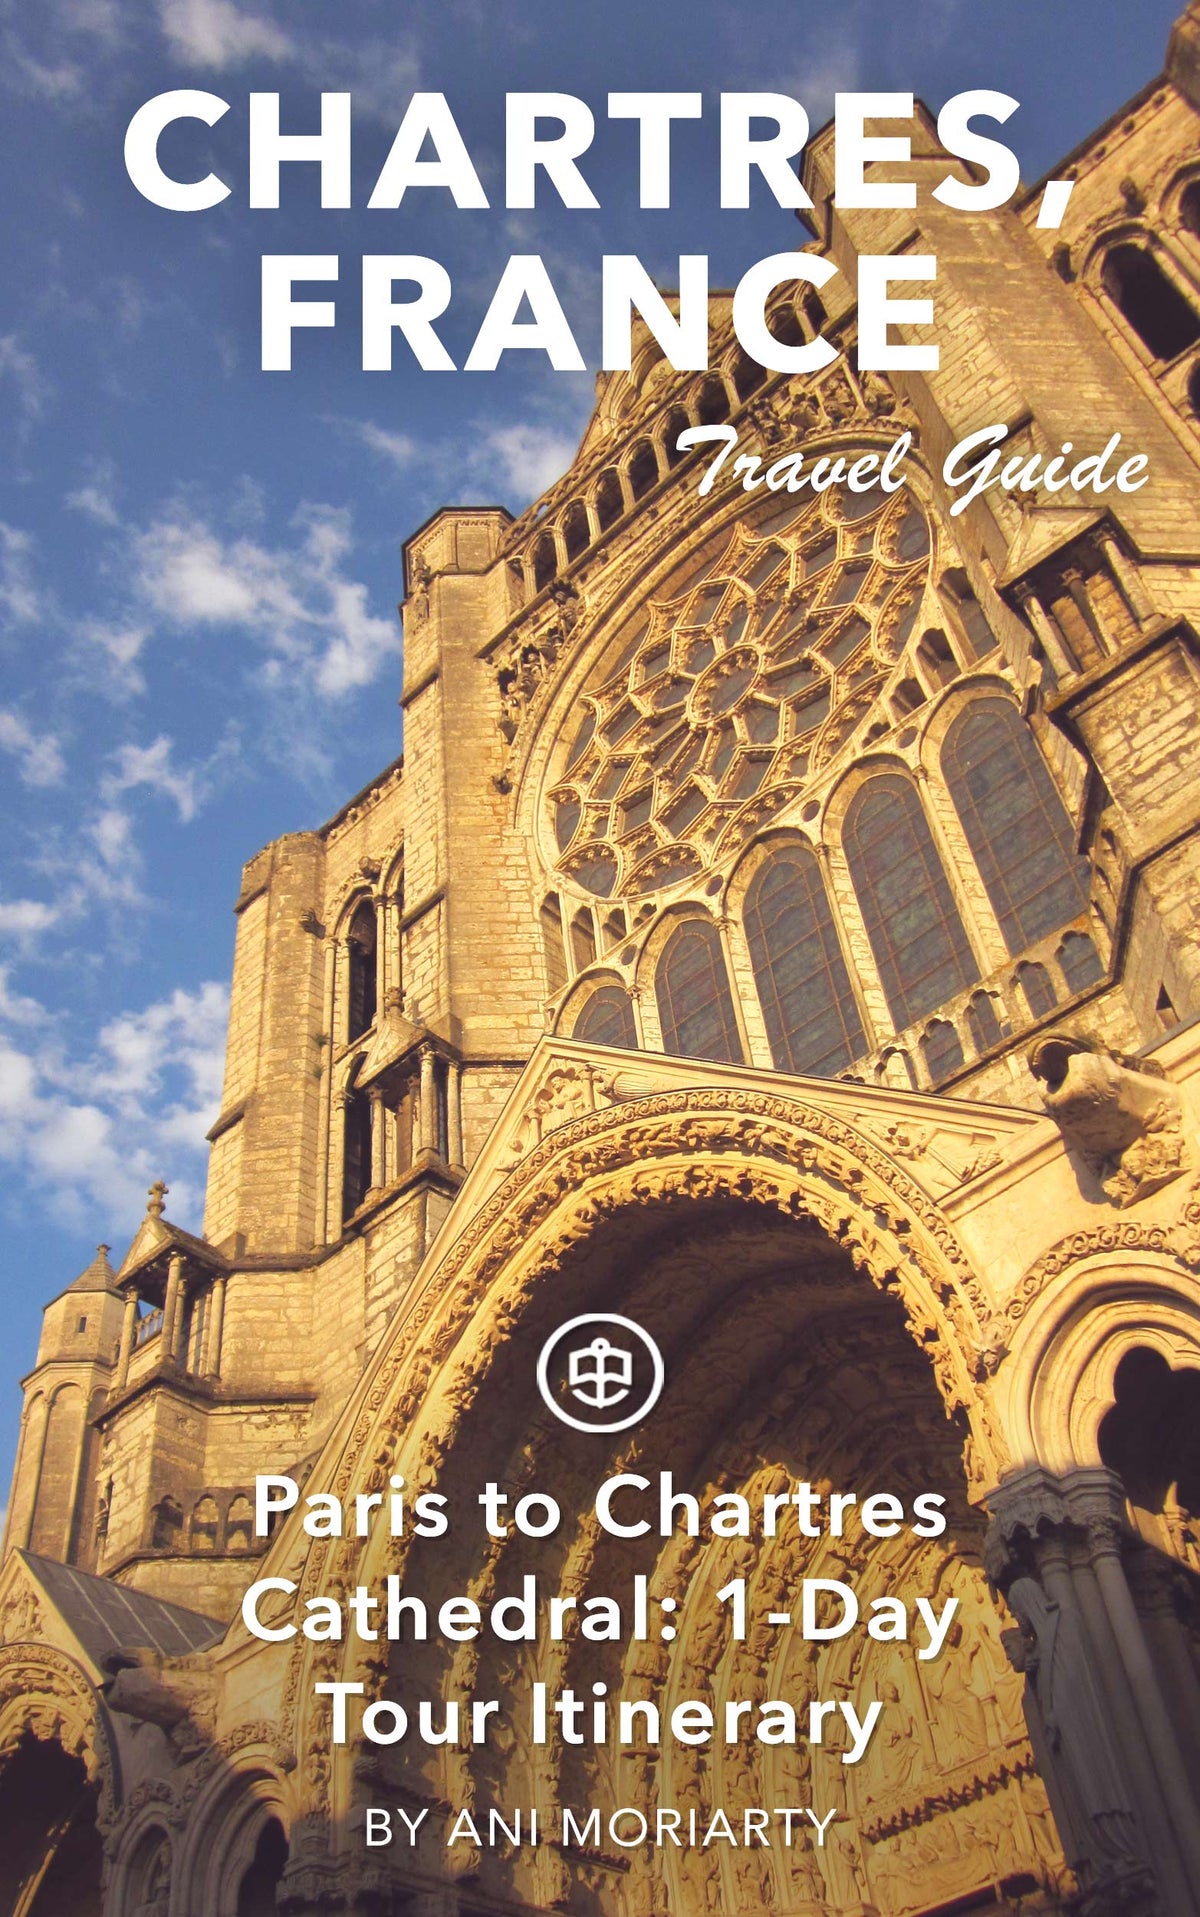 Paris to Chartres Cathedral: 1-Day Tour Itinerary